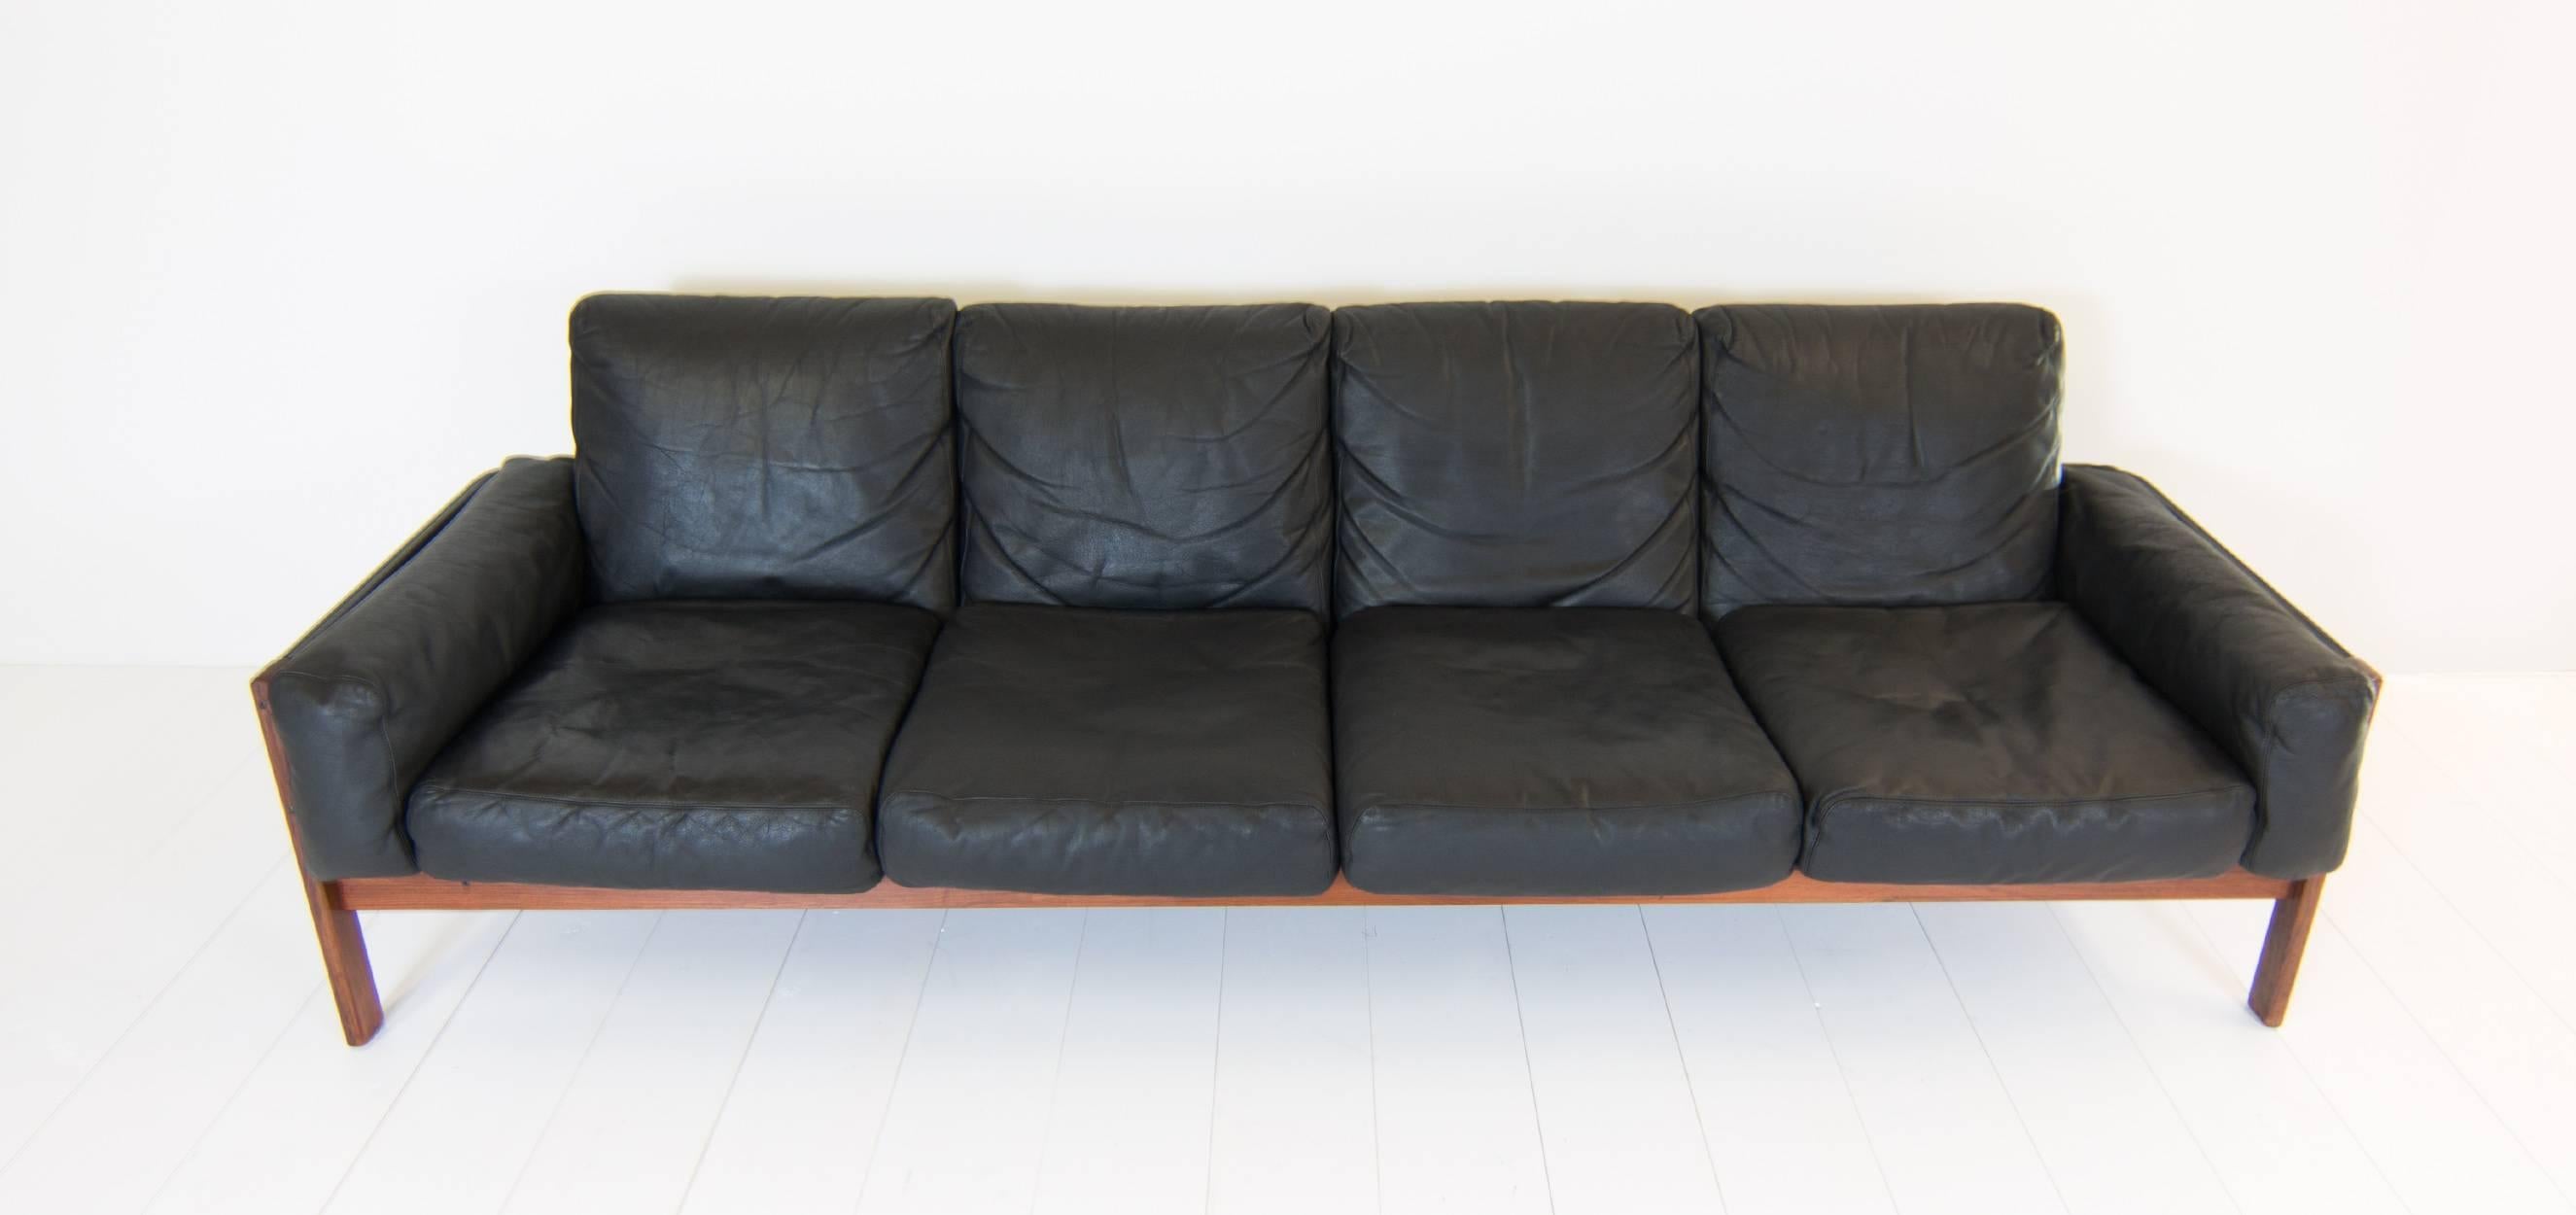 Sven Ivar Dysthe four-seat is produced by Dokka Møbler in Oslo. The sofa is designed in Norway in the 1960s. The frame is made from rosewood and is upholstered in black leather. The cushions are filled with down feathers.

The condition of this